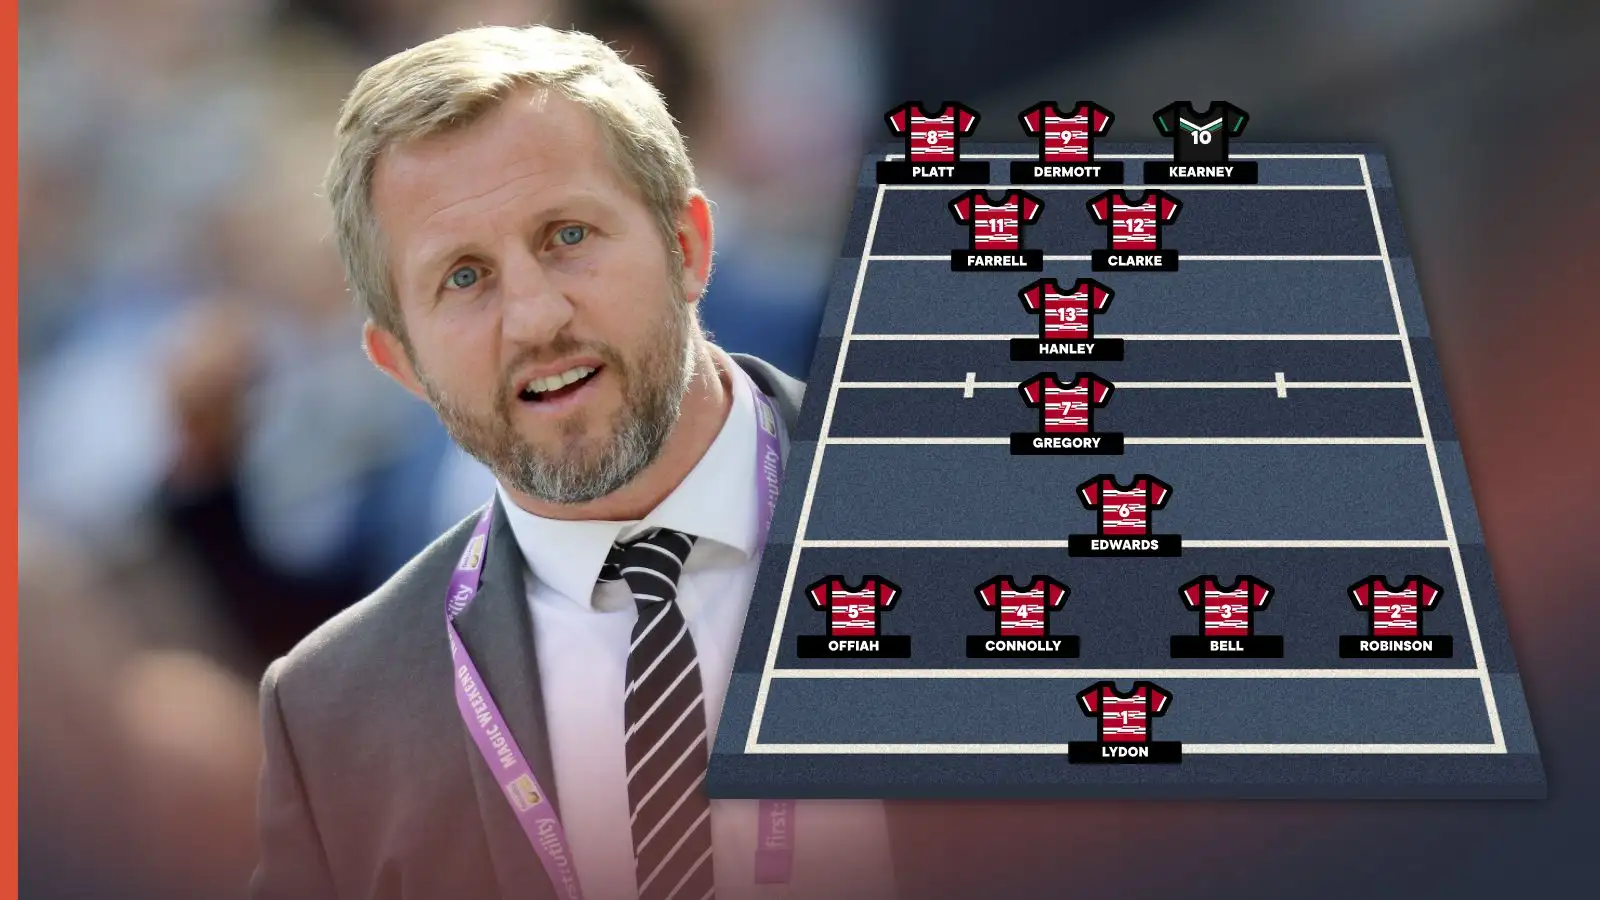 My Ultimate Team: Wigan Warriors legend Denis Betts names his greatest 1-13 of players he played alongside